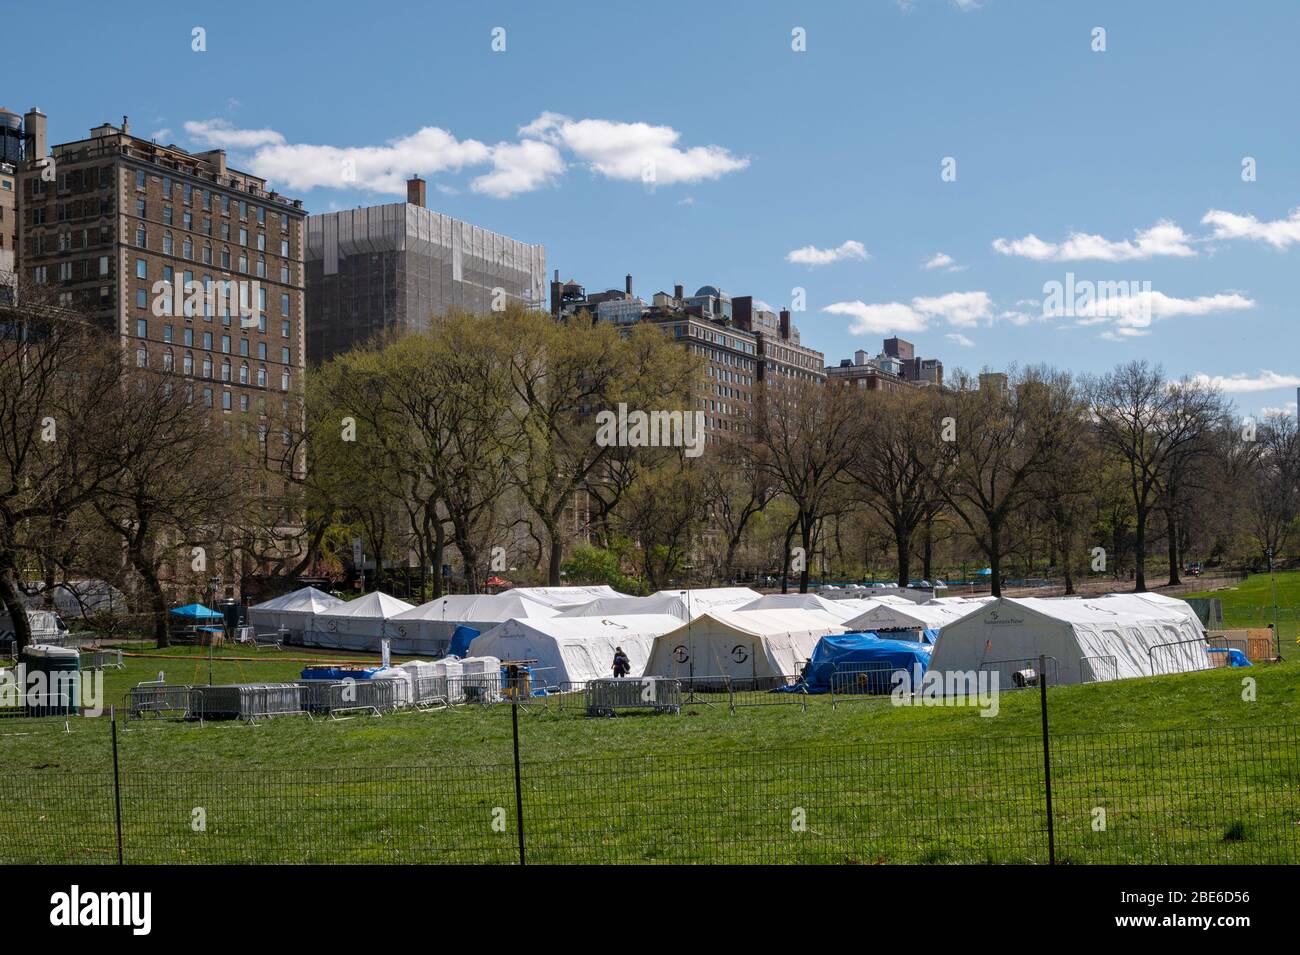 New York, NY, USA. April 11, 2020. Field hospital in the East Meadow of Central Park outside of Mt Sinai hosptial. The 14-tent hospital, built by evan Stock Photo